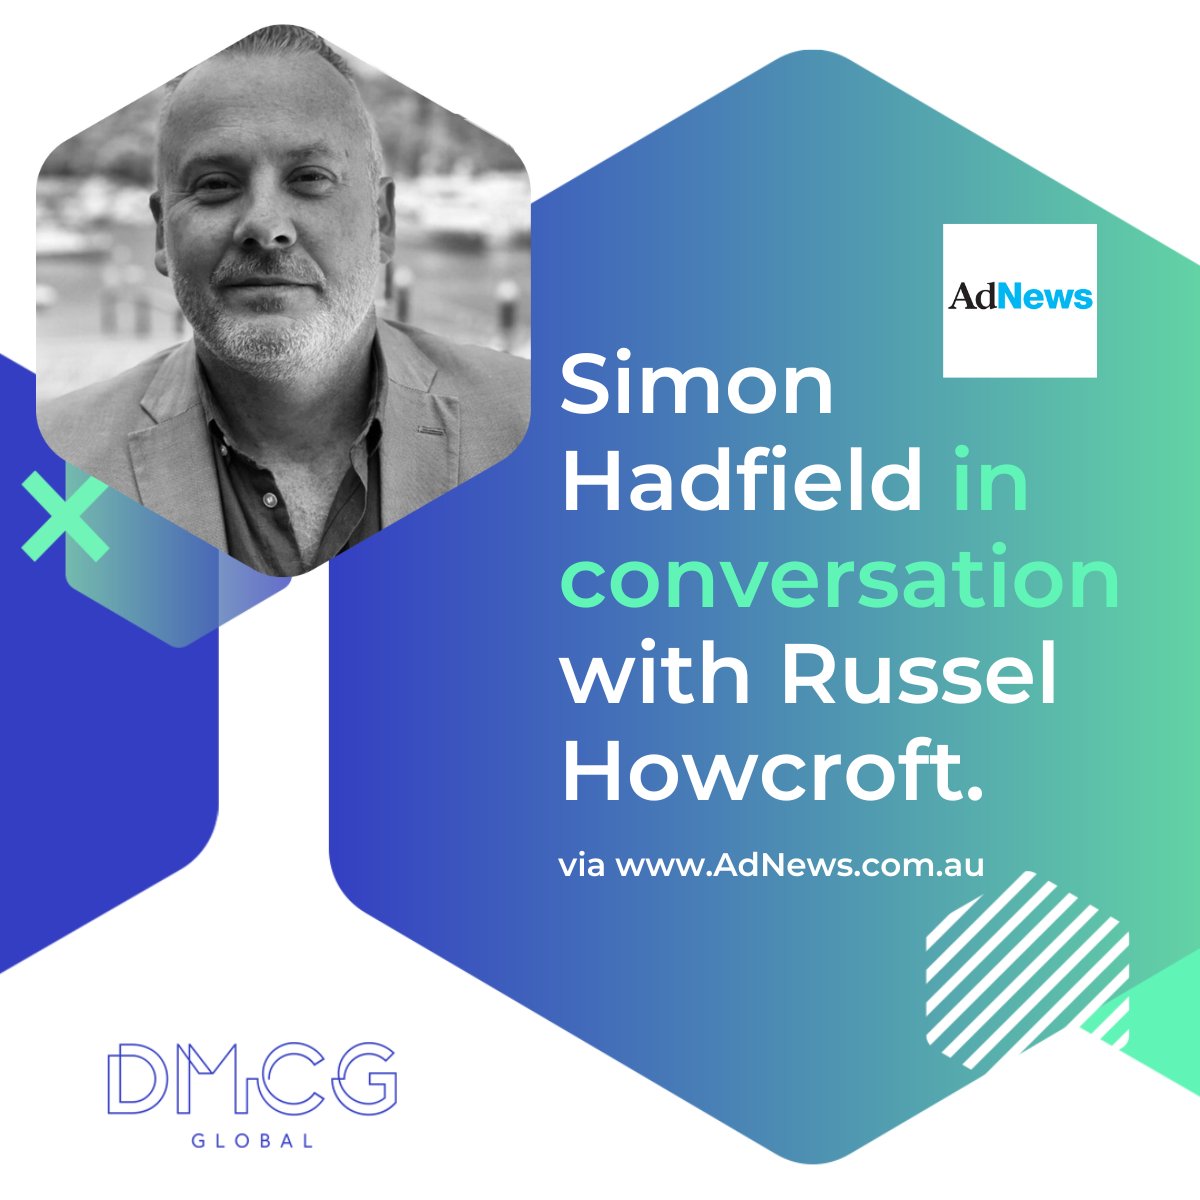 For his latest interview DMCG Global's Simon Hadfield caught up with this year's @AdNews Australia Advertising Hall of Fame inductee Russel Howcroft: adnews.com.au/news/in-conver…

#AdvertisingIndustry #CreativeIndustry #Creatives #Interview #Advertising #CreativeAdvertising